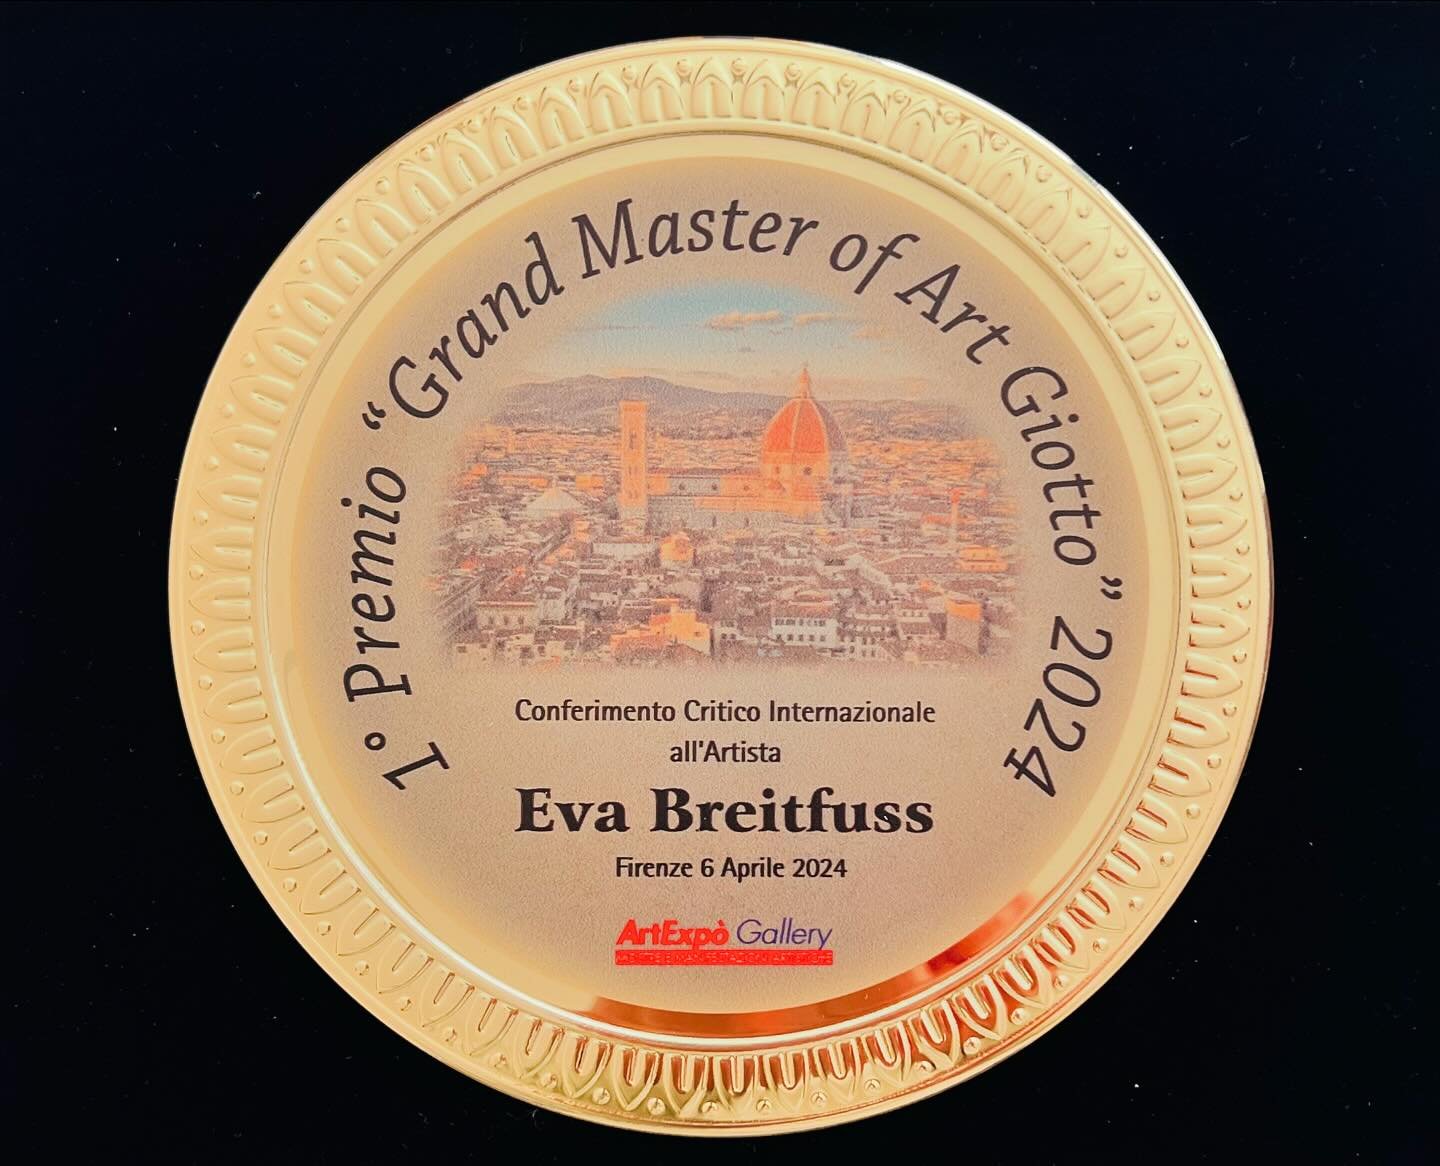 On April 6/2024 I received the 1 Premio &ldquo;Grand Master of Art Giotto&ldquo; 2024 in Florence @grandhotelbaglioni .
Thank you @artexpo_gallery. I&rsquo;m delighted to see my artwork TWILIGHT as the Award-winning work. 

#awardwinning #artwork #ar